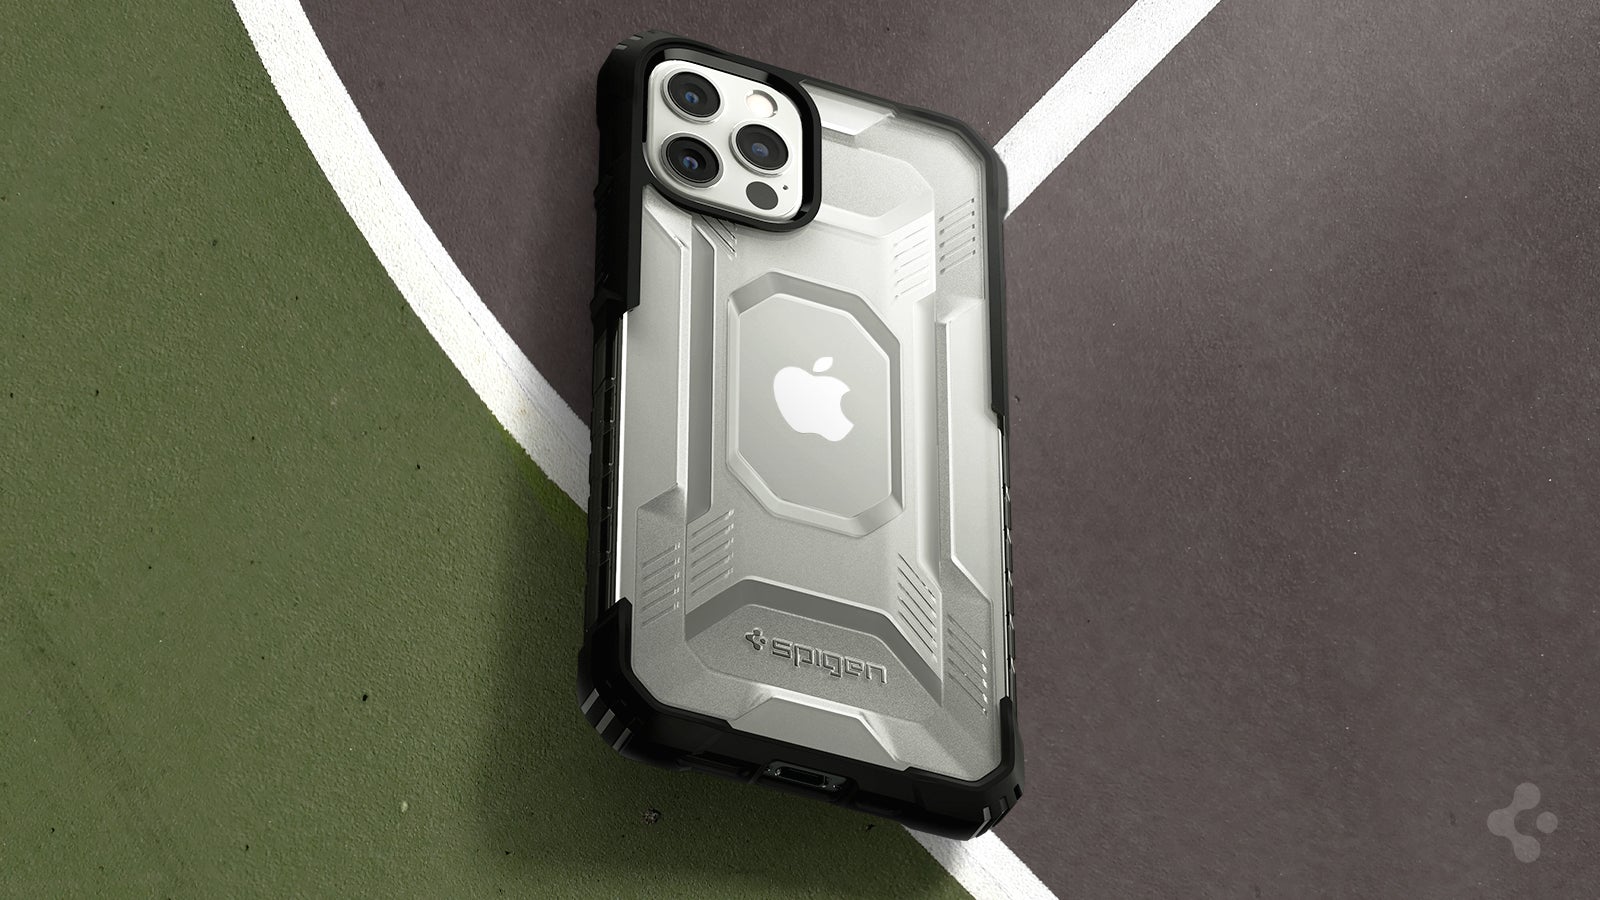 Spigen's new case for the iPhone 12 is insane!